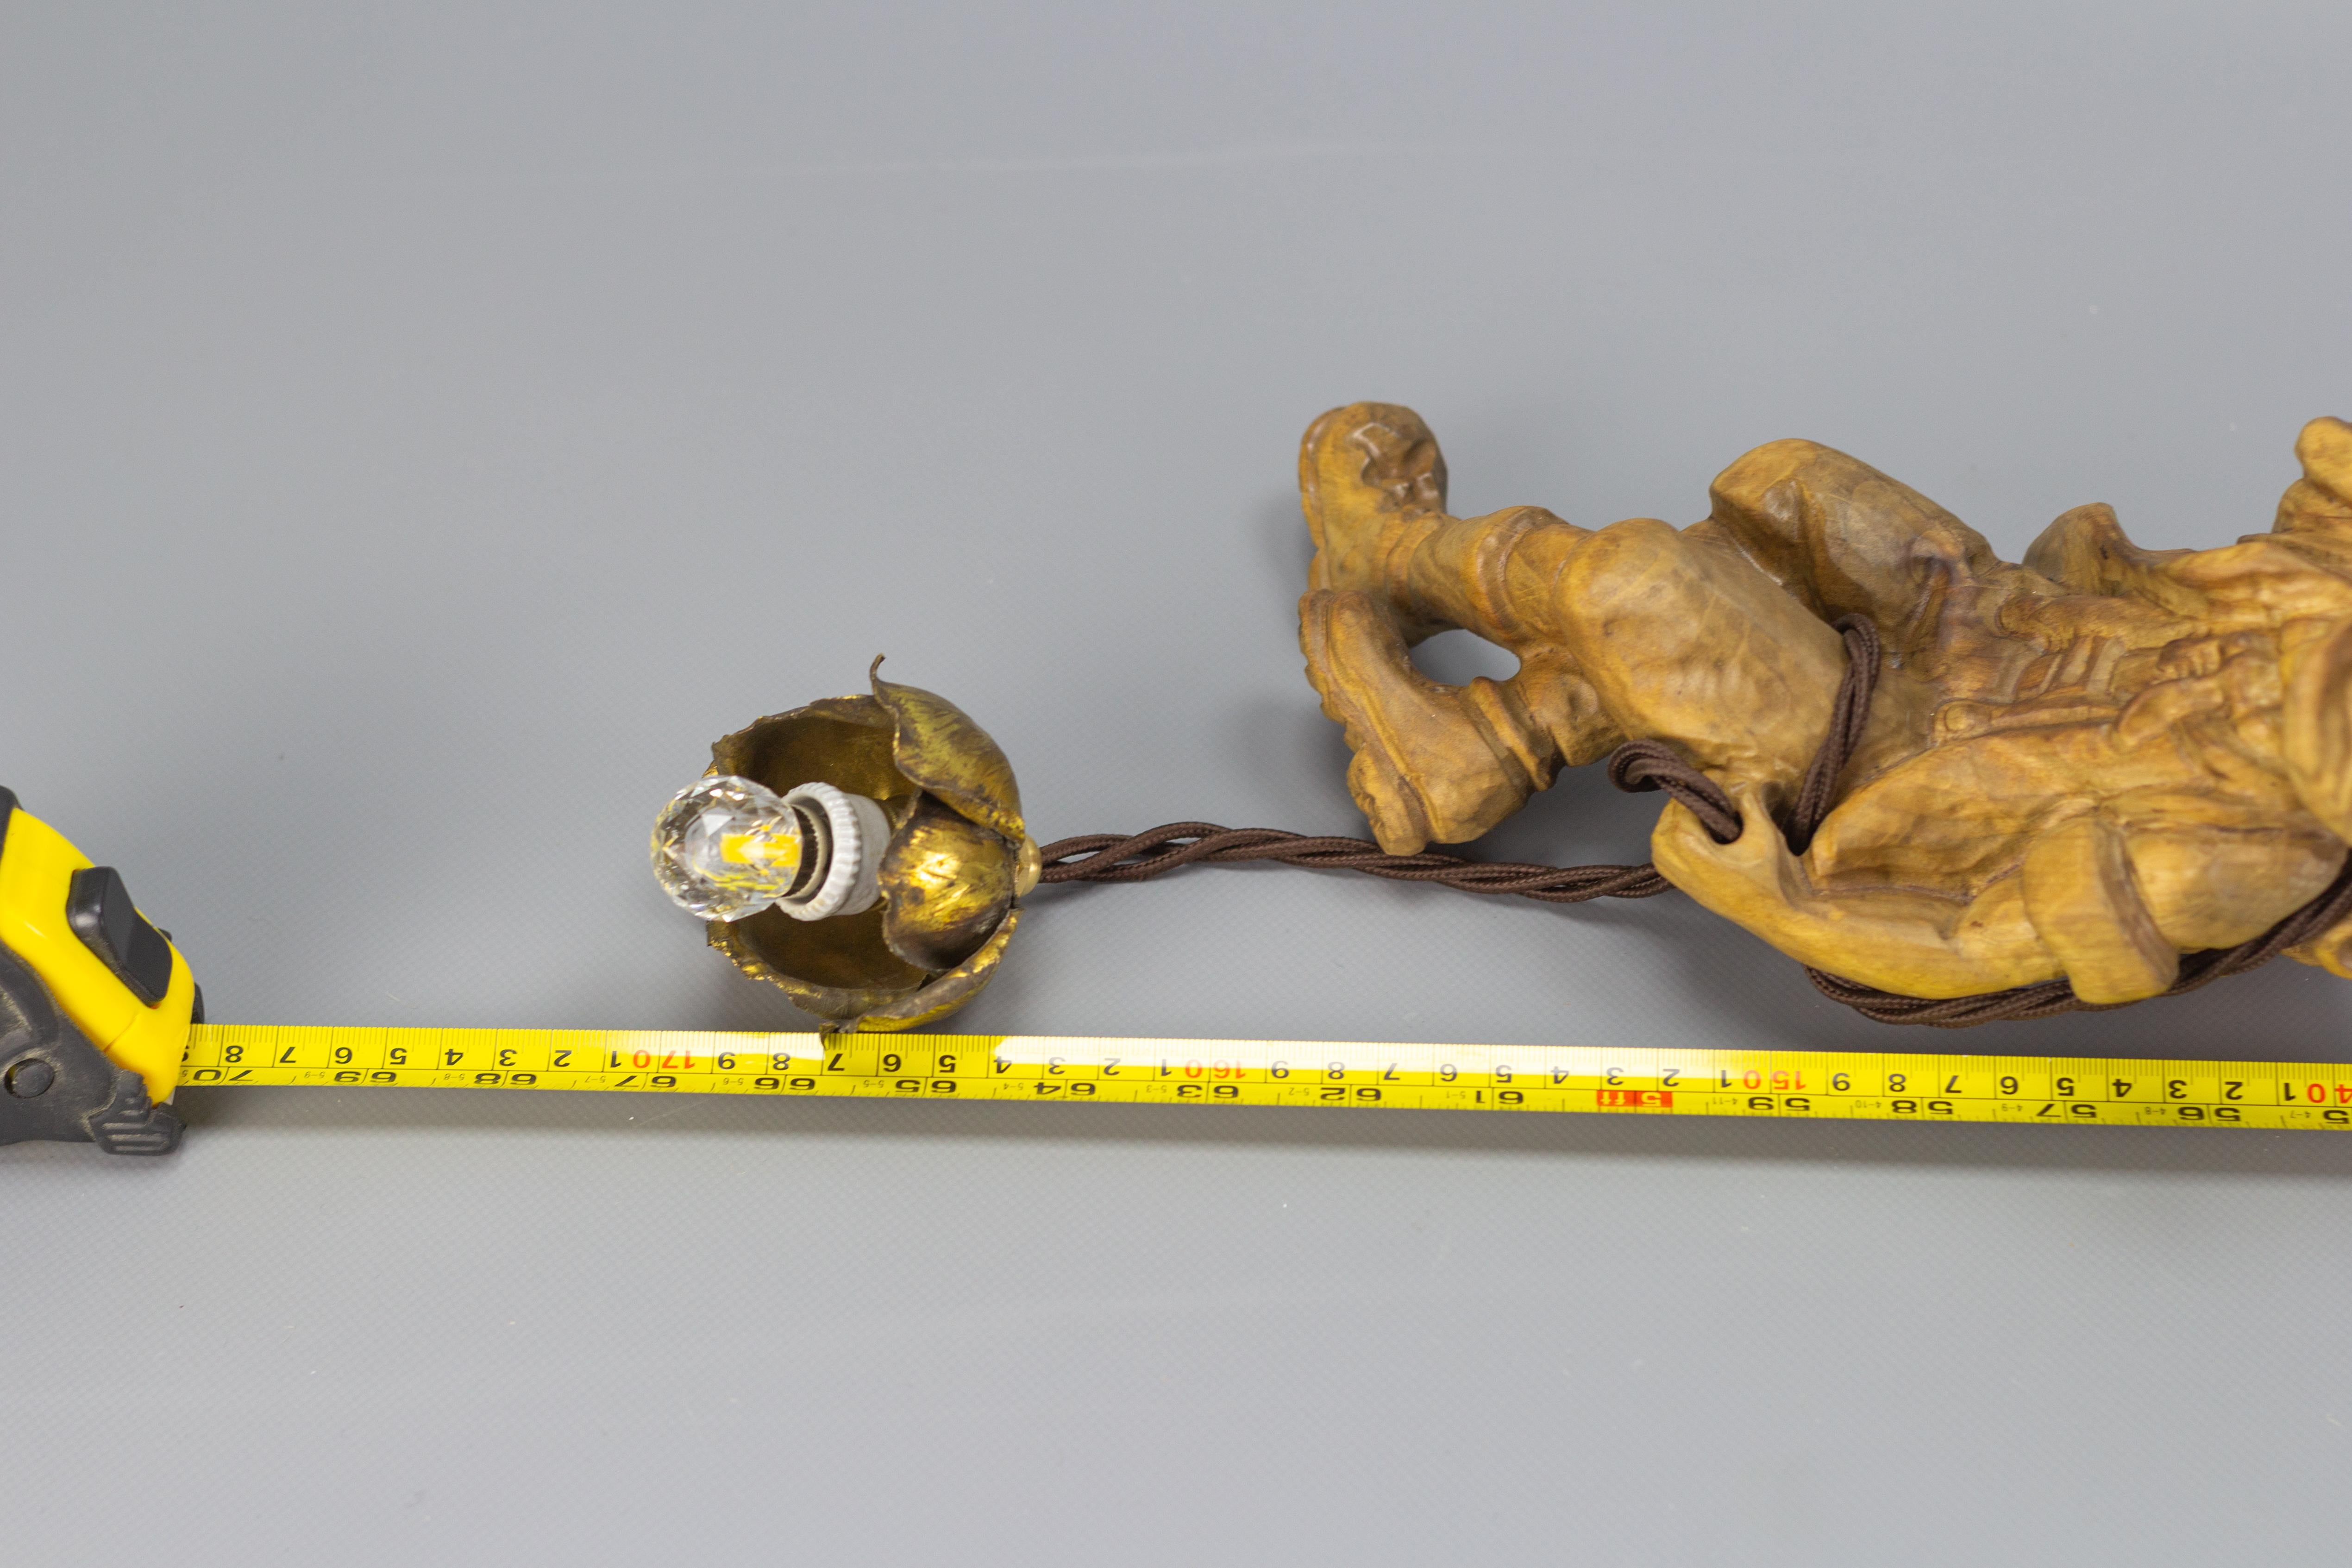 Hanging Brass Light Fixture with a Wooden Figure of a Mountain Climber For Sale 7